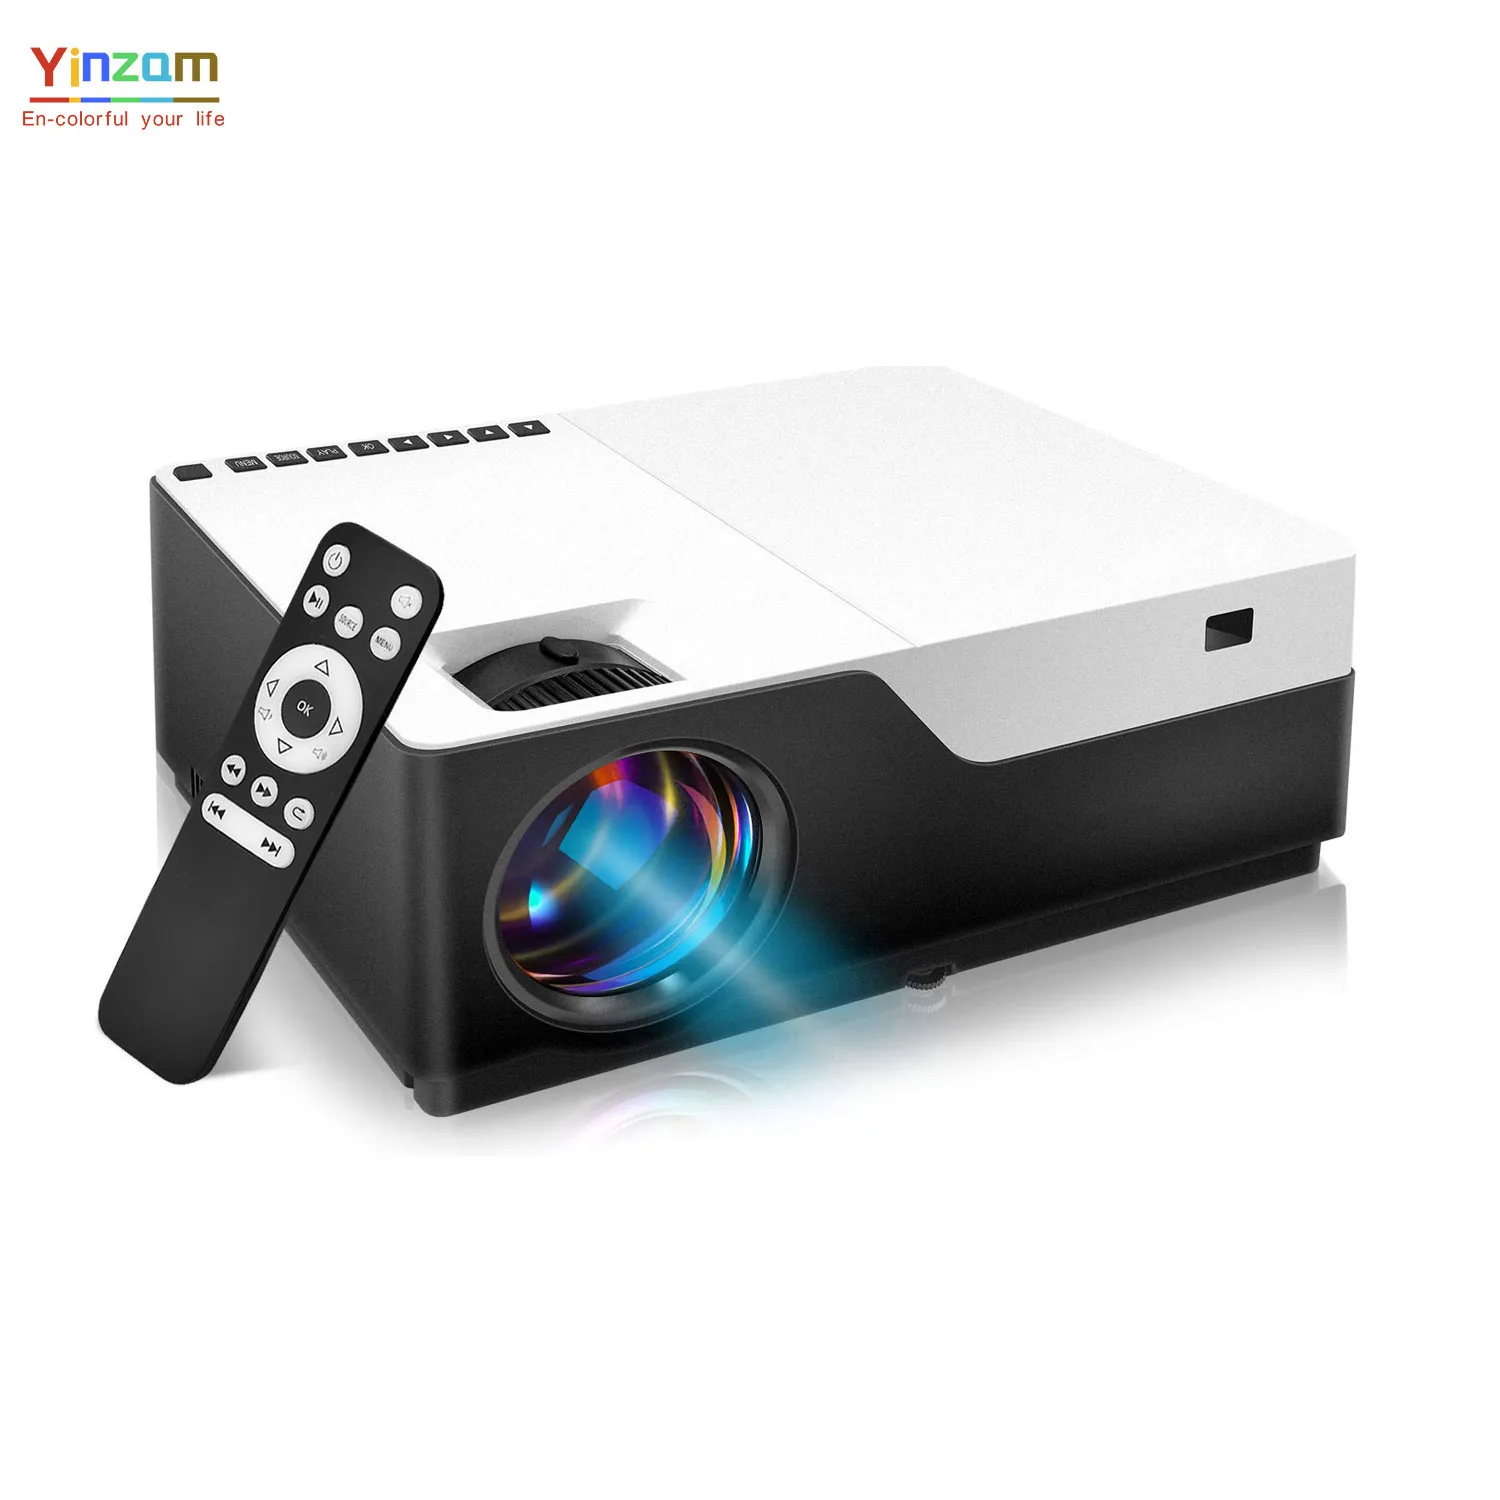 

Yinzam M18 1920x1080p Projector, Education Multimedia Player Overhead Projector 1080p with 5500 Lumens 300inch Screen Beamer